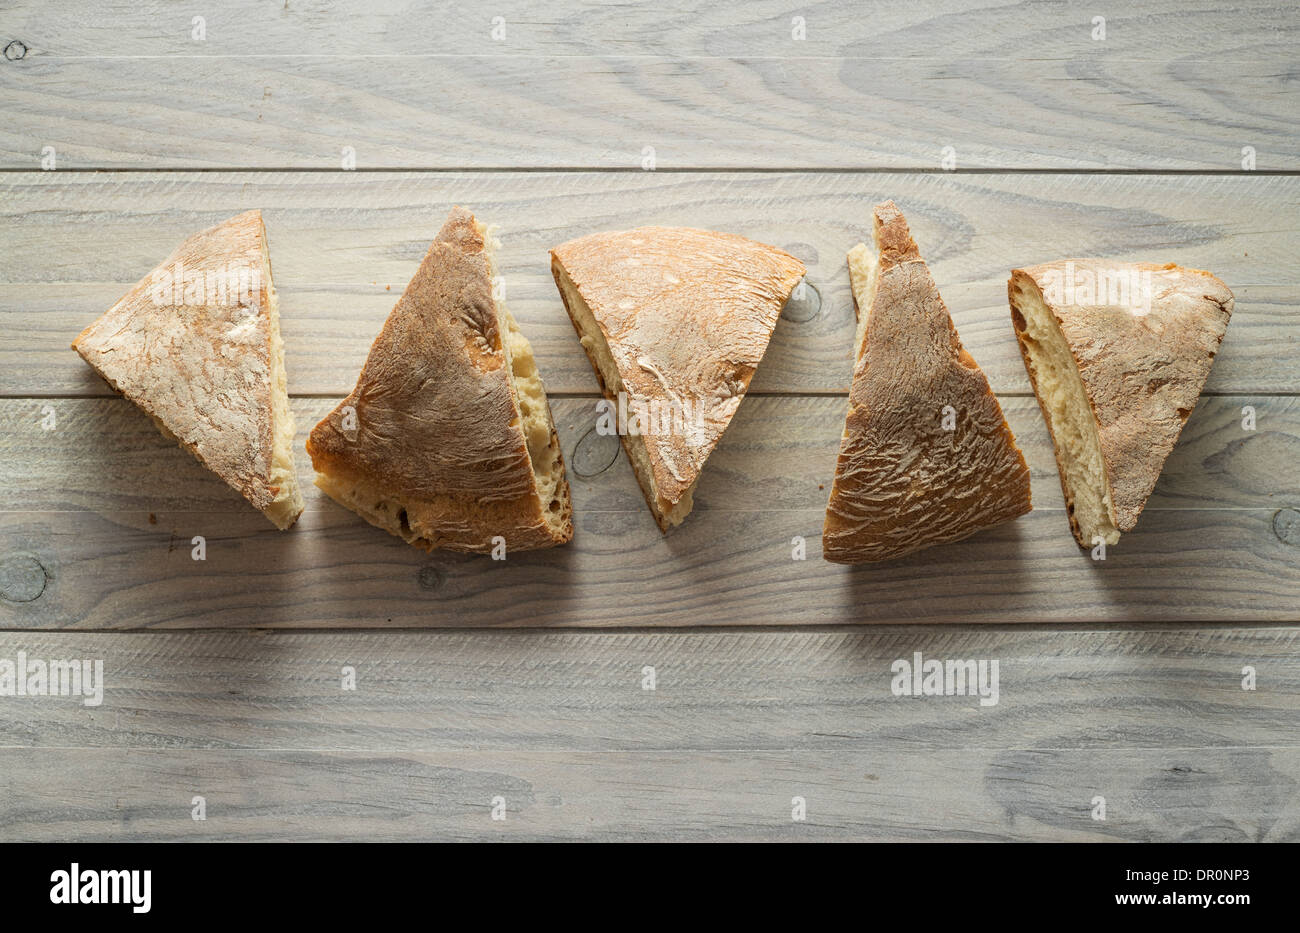 Loaf of bread on a rustic wooden background Stock Photo